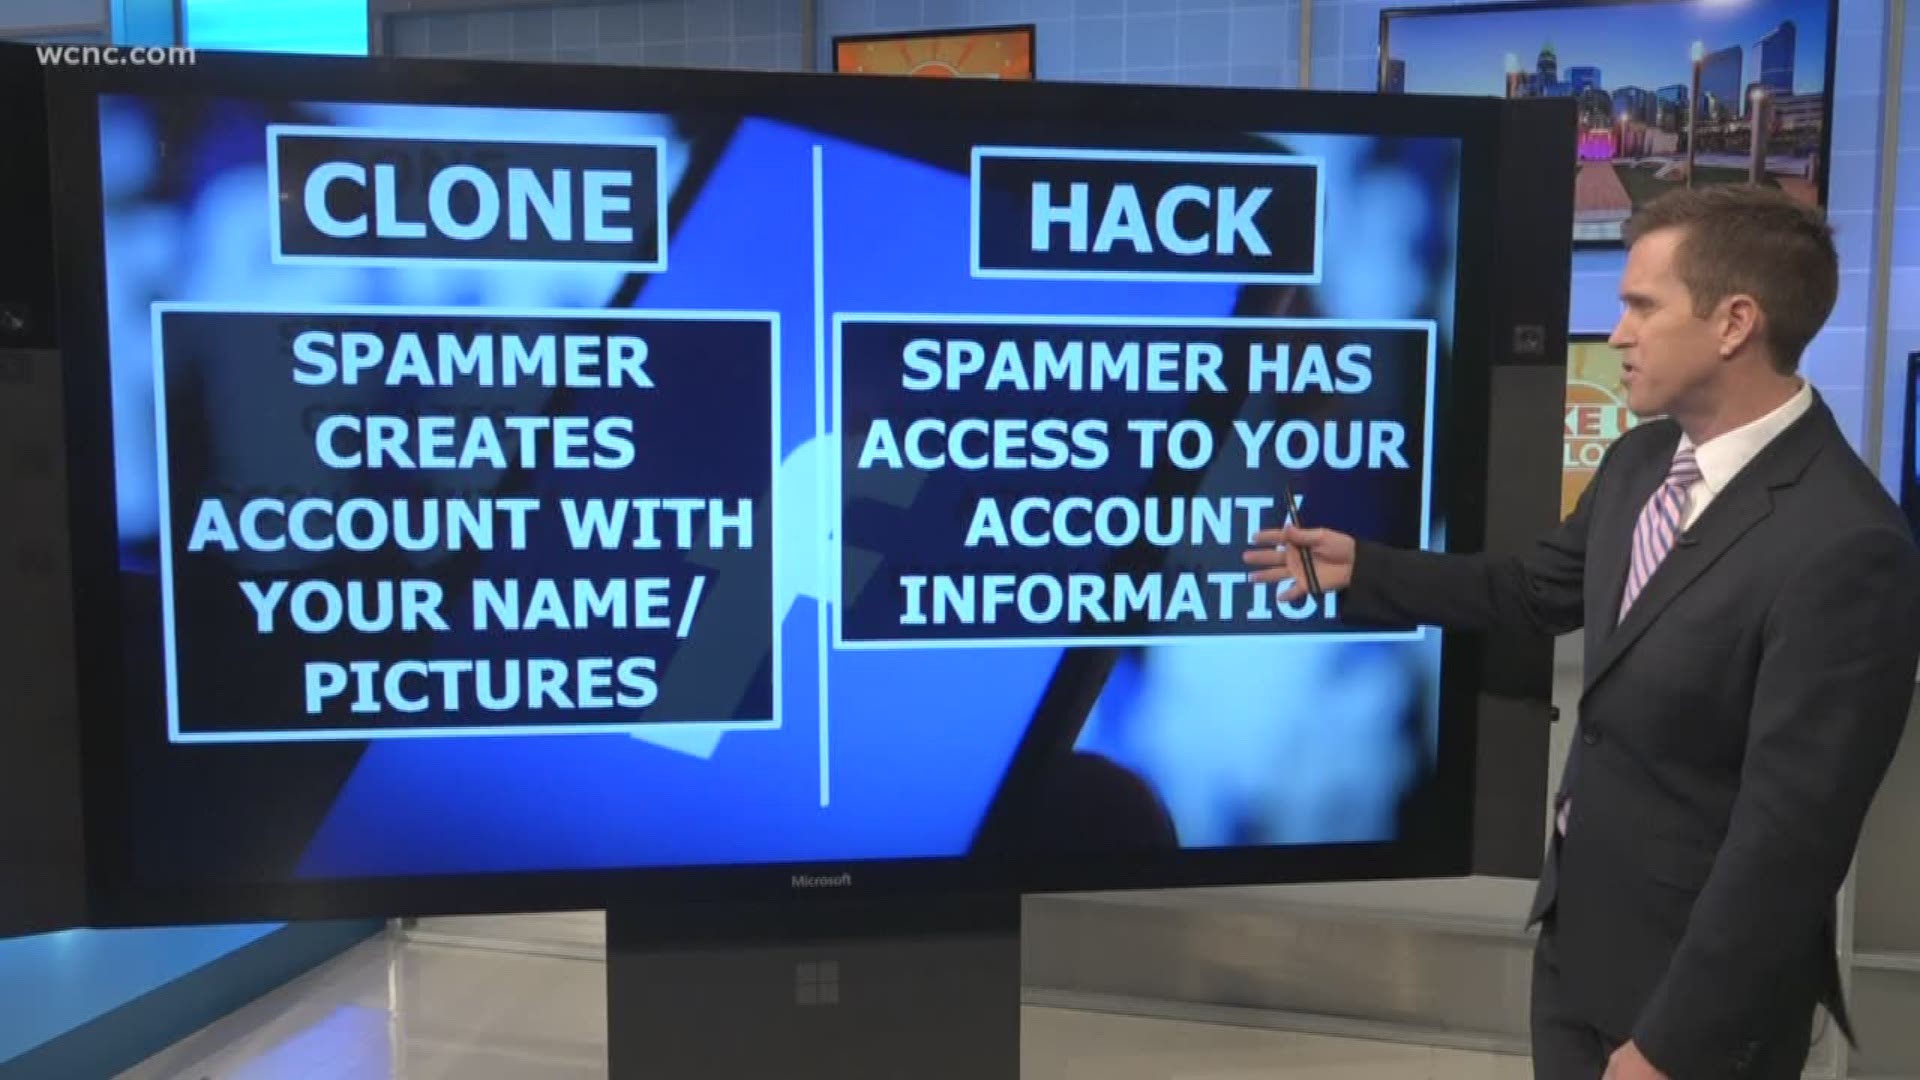 If you've been on Facebook recently, you've likely seen it. A message from one of your friends saying they've been hacked. But the message itself could be a hoax. Here's what you need to know about the latest spam scheme.